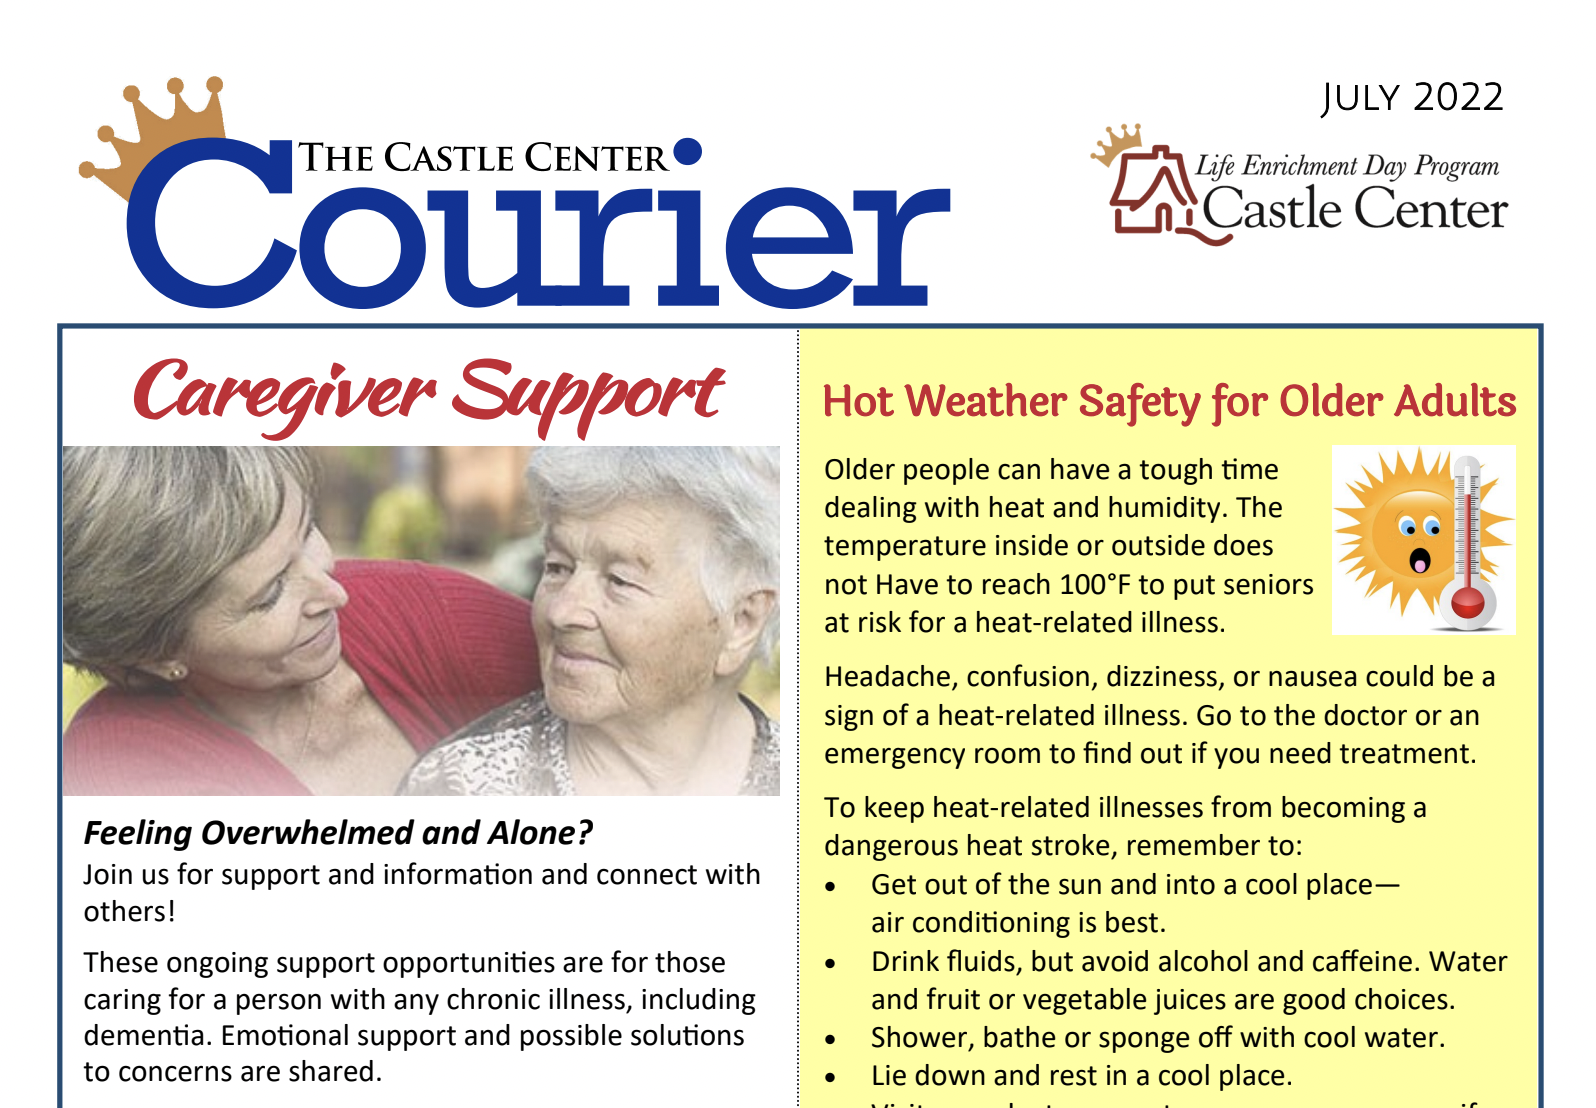 Part of the front page for the July 2022 Castle Center Newsletter